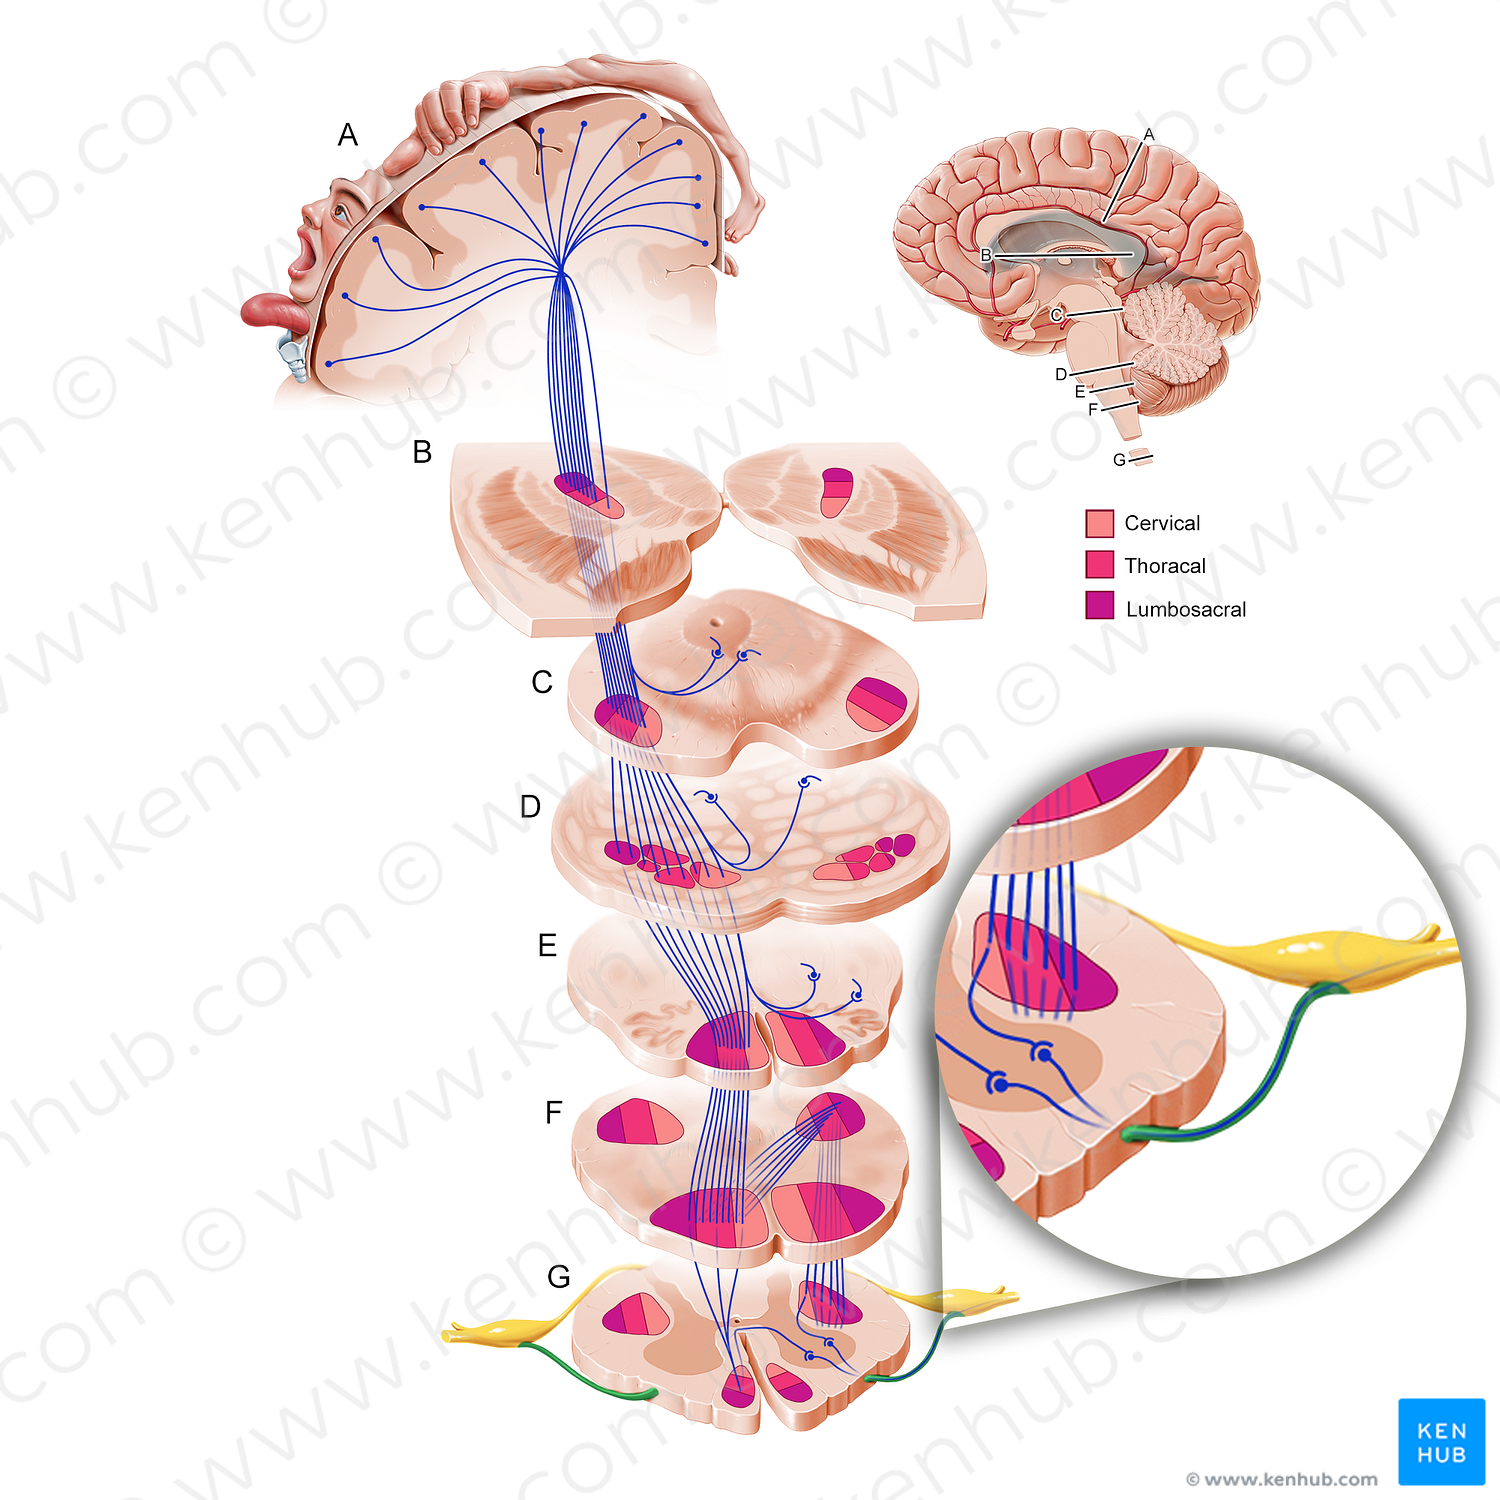 Anterior root of spinal nerve (#11209)